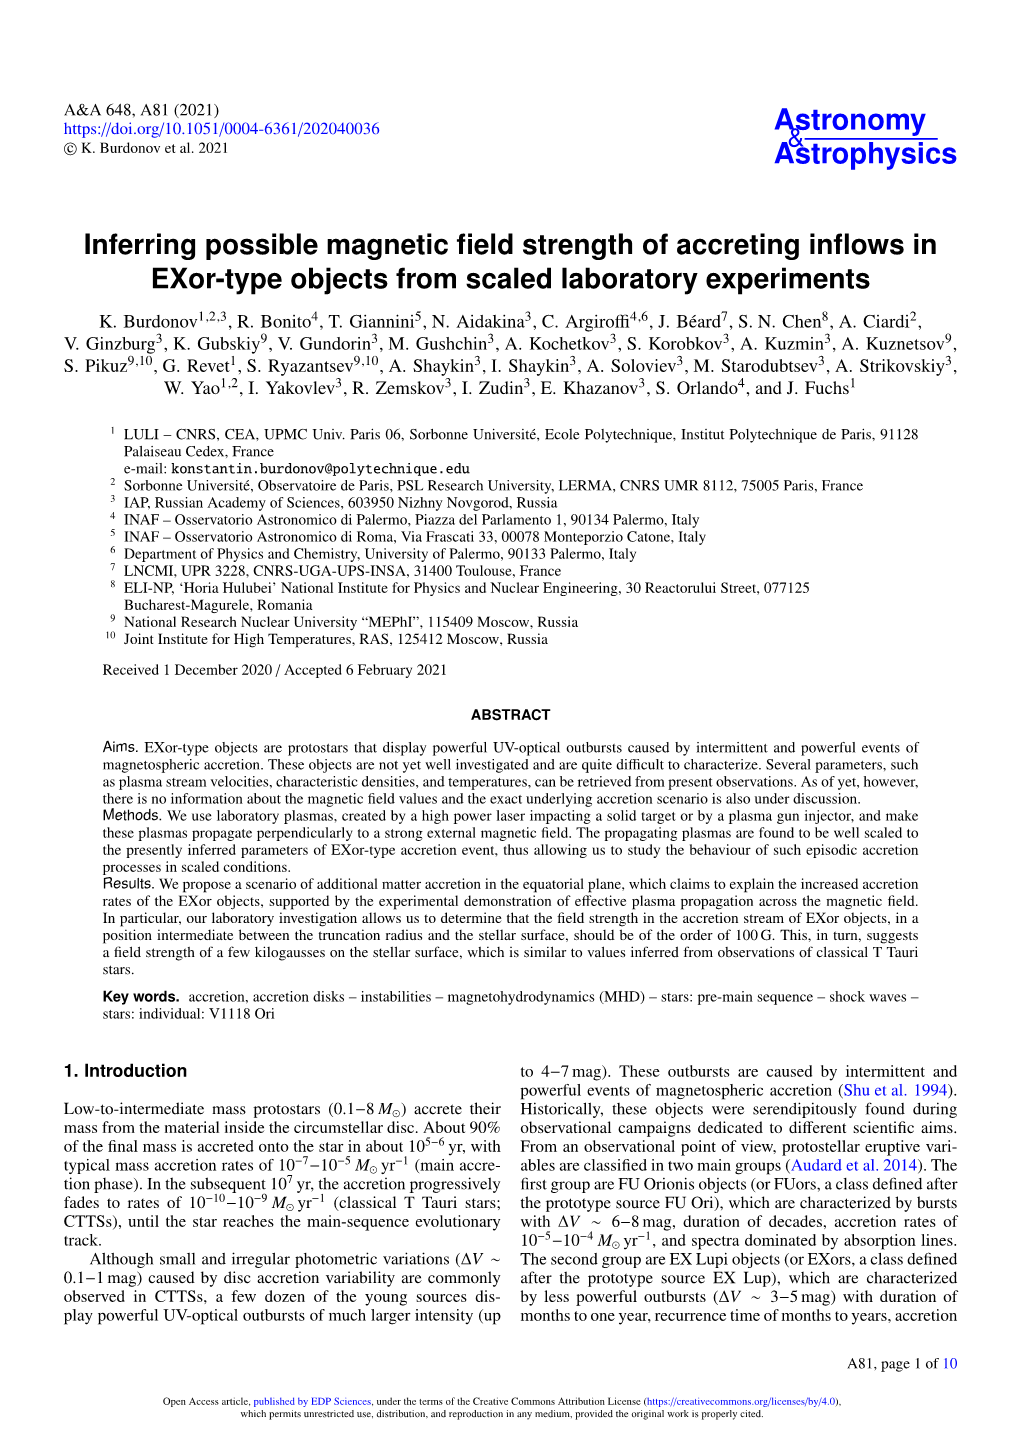 Inferring Possible Magnetic Field Strength of Accreting Inflows in Exor